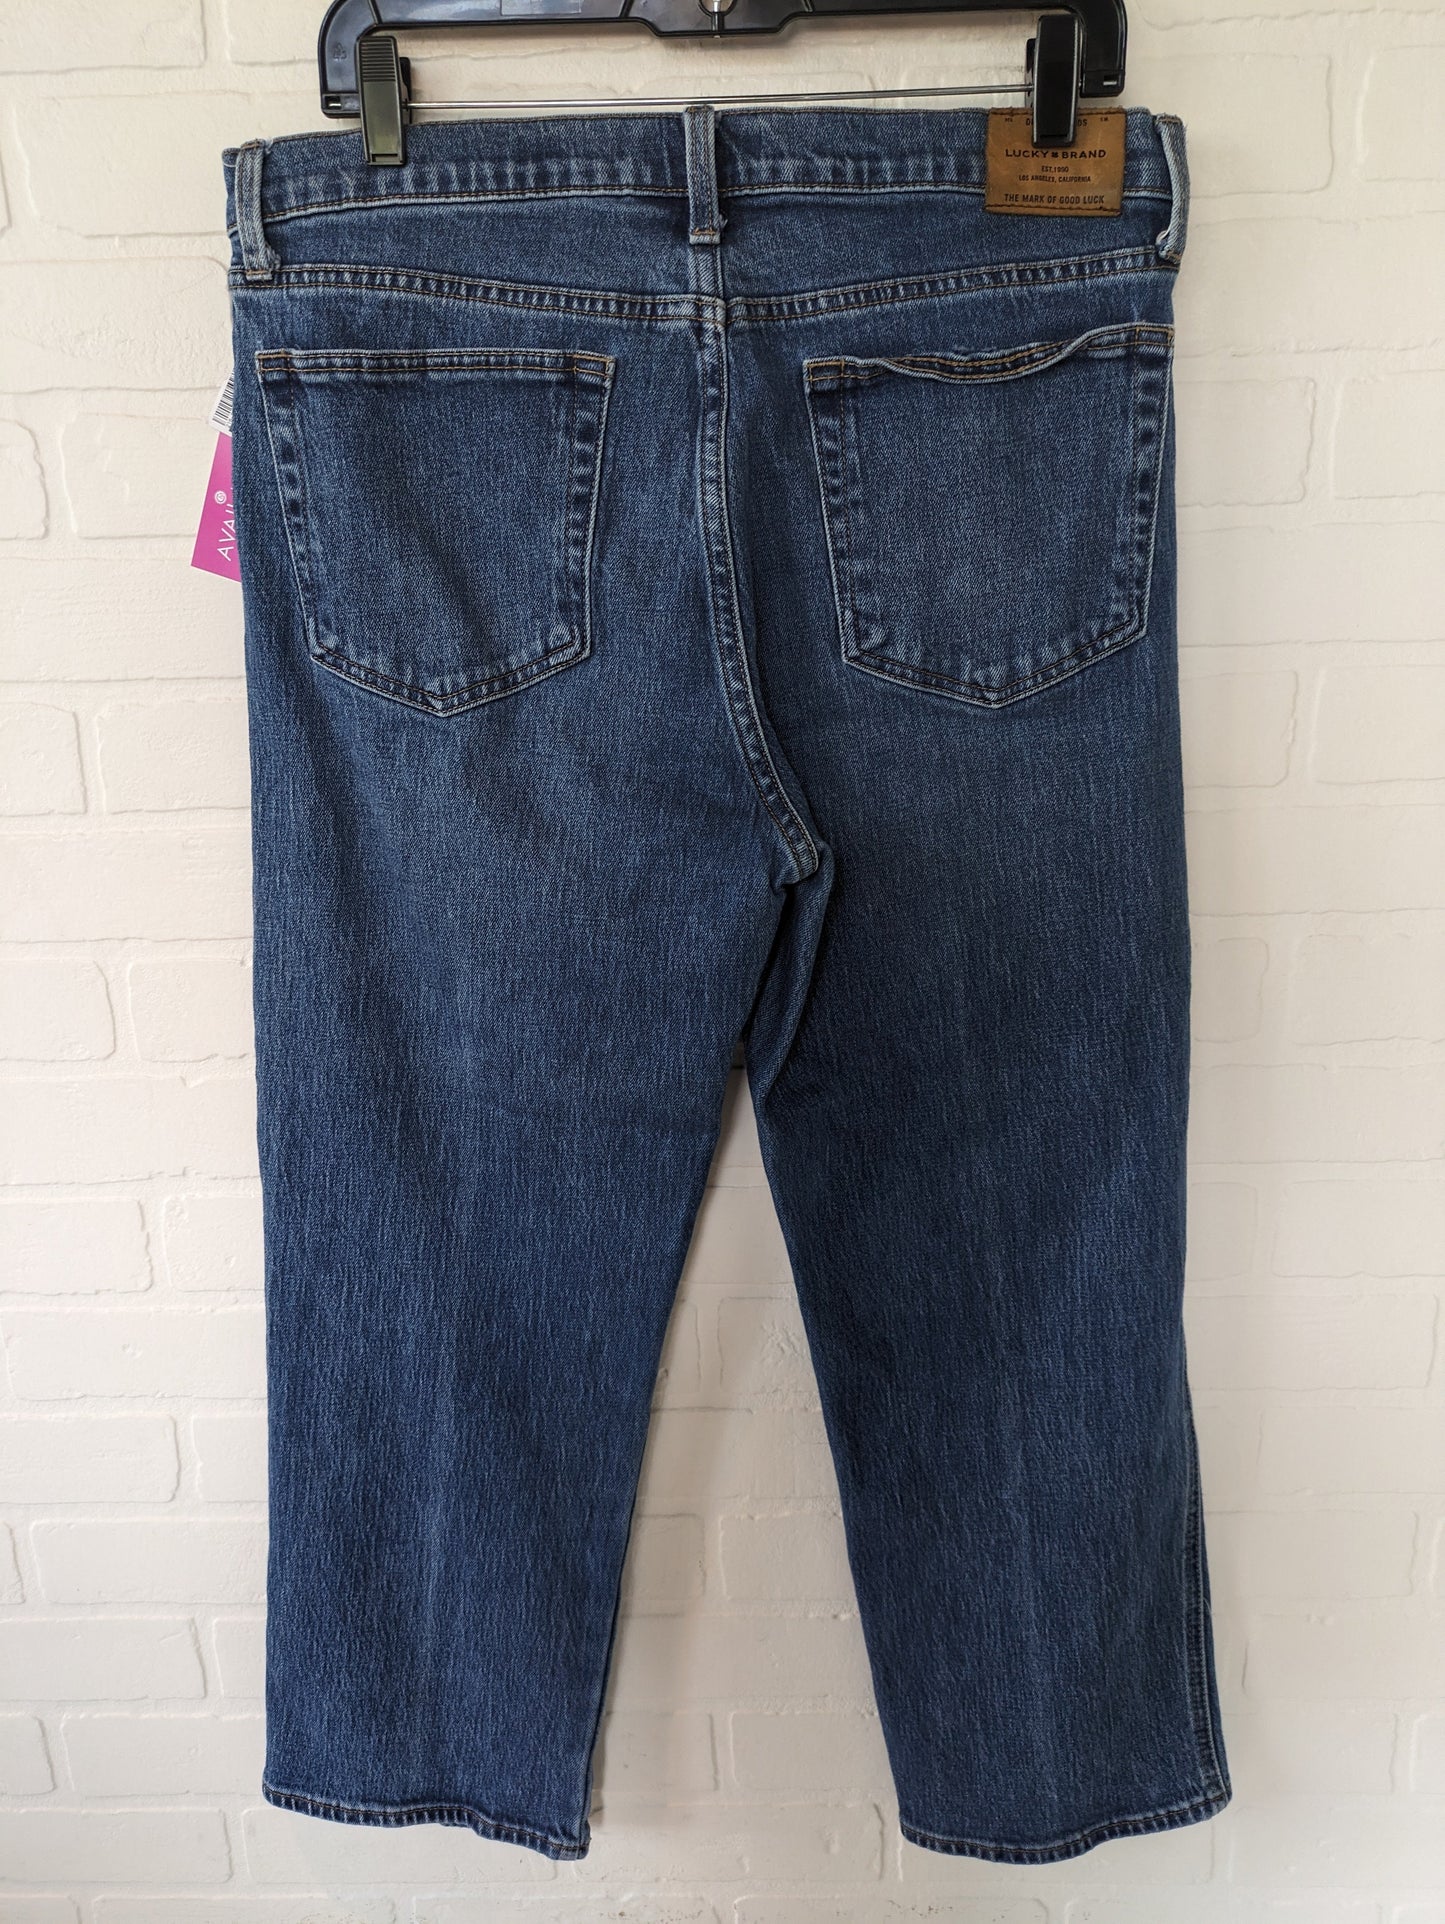 Blue Denim Jeans Cropped Lucky Brand, Size 10